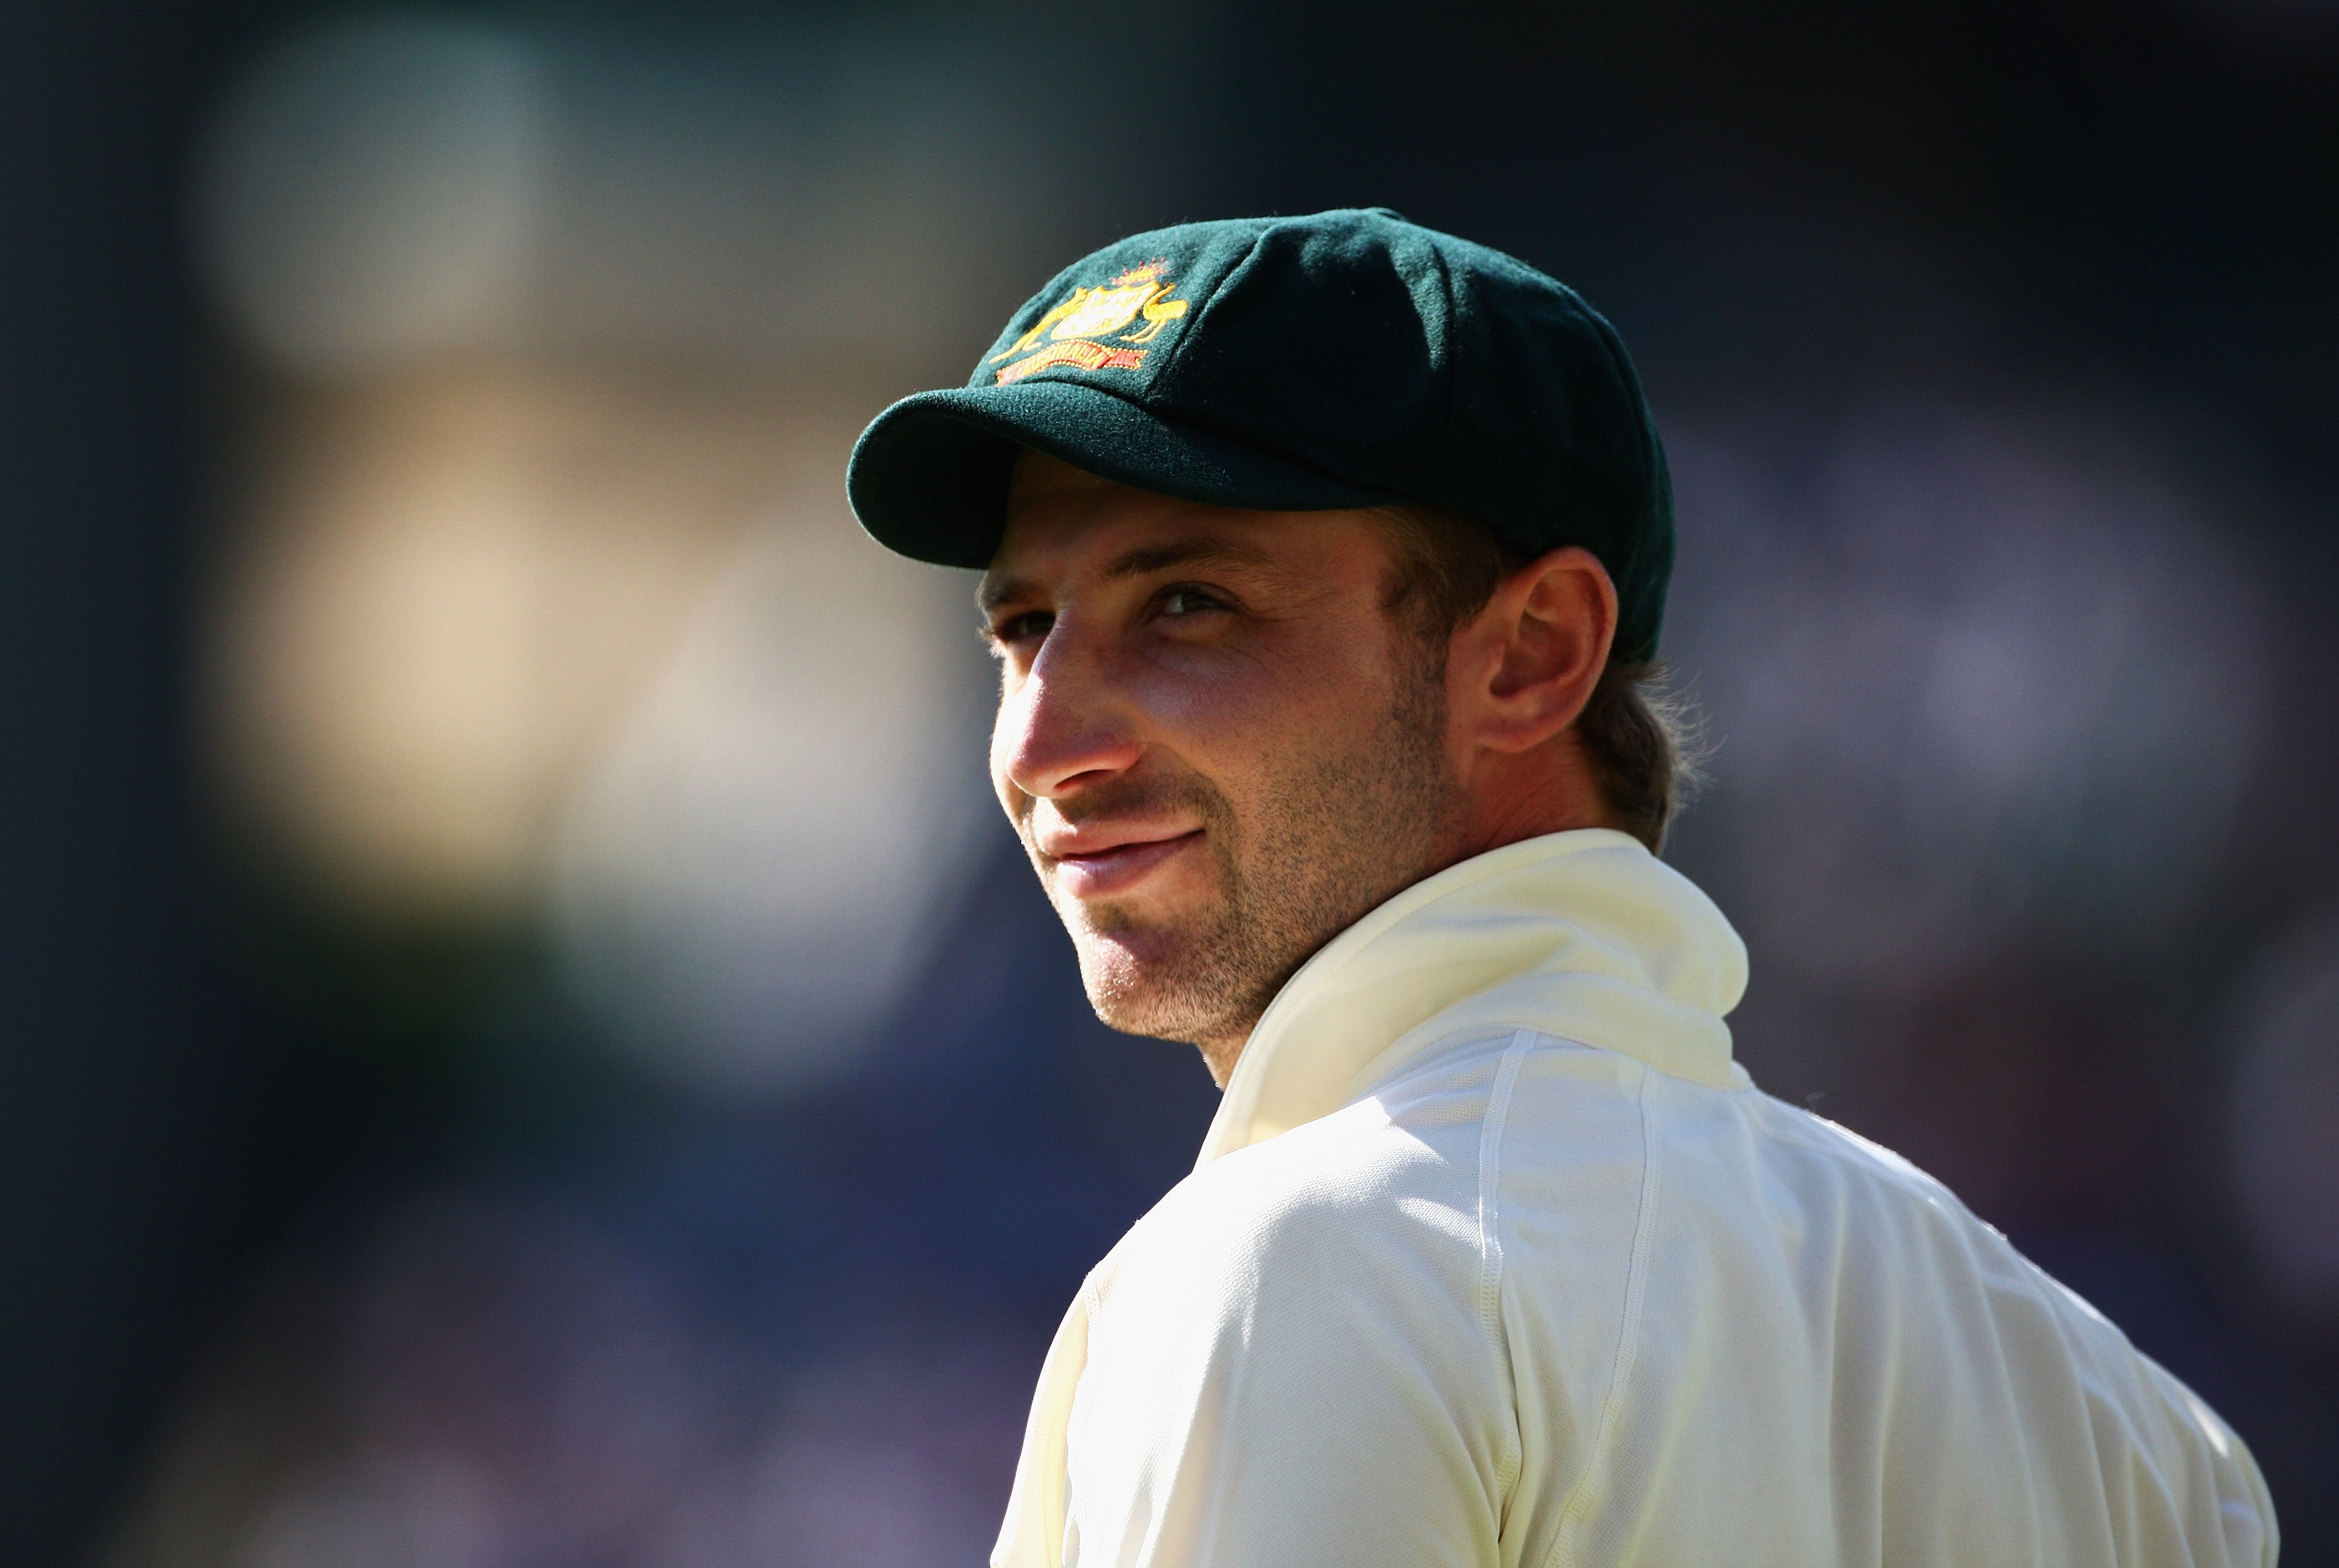 Phil Hughes on X: There's already too much division in our